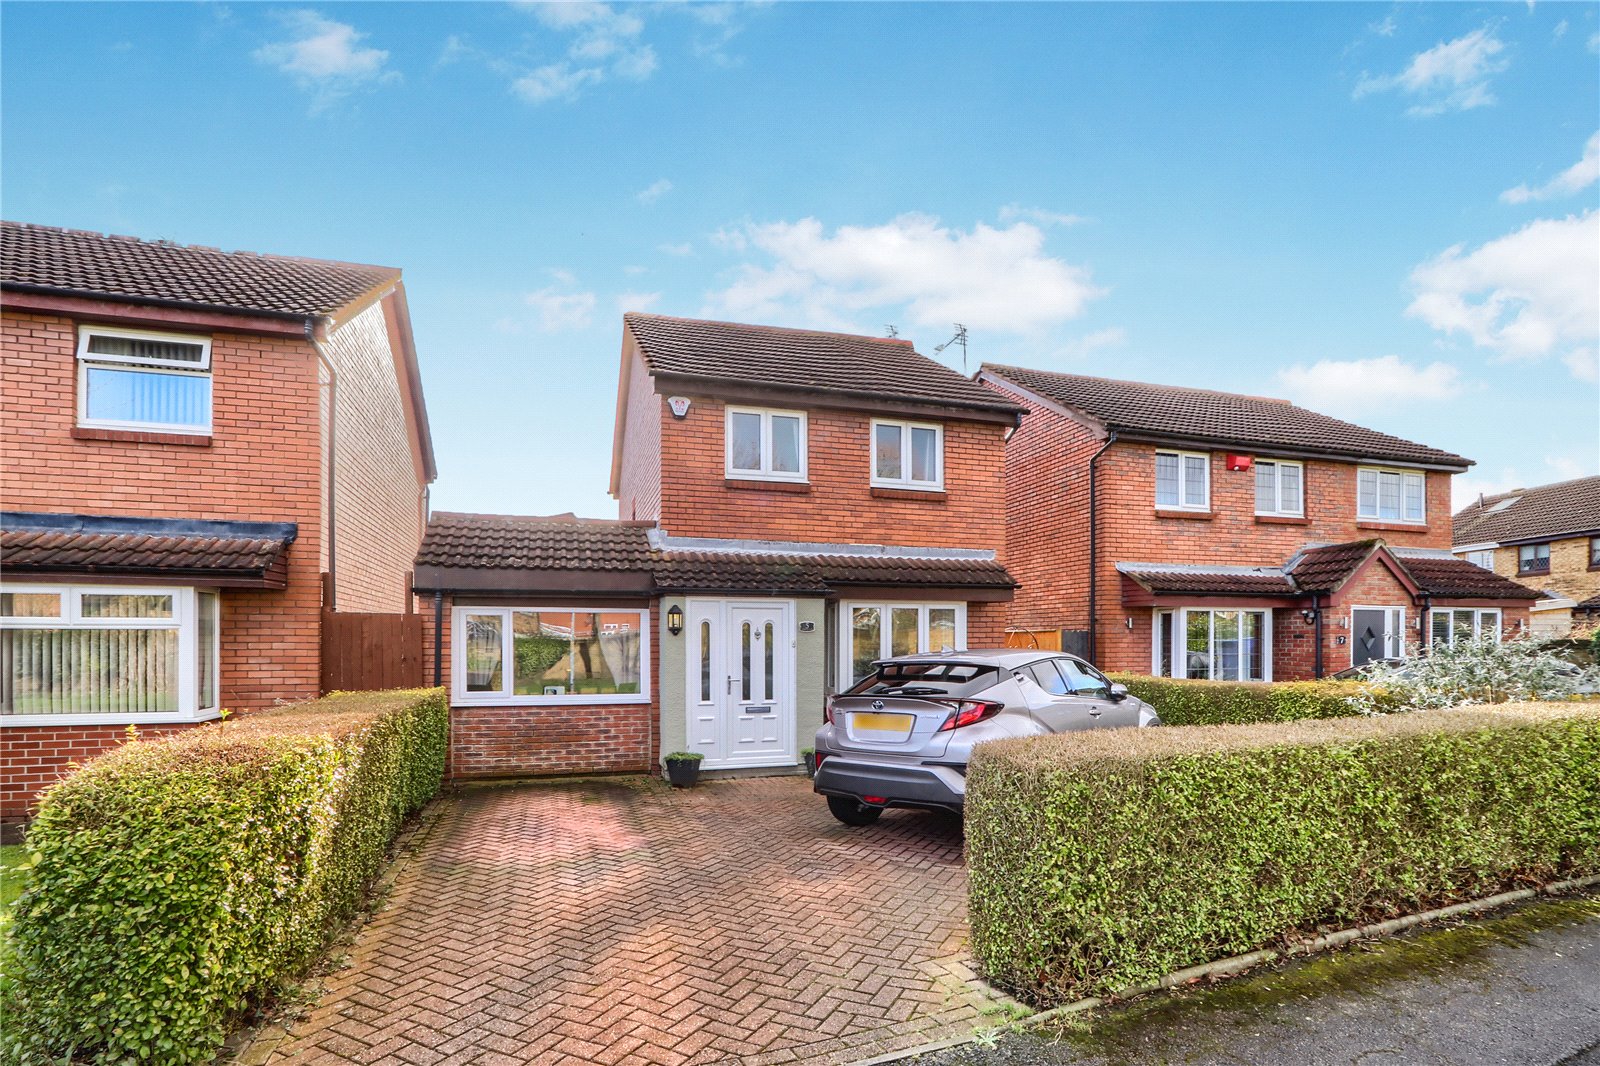 3 bed house for sale in Barford Close, The Glebe 1